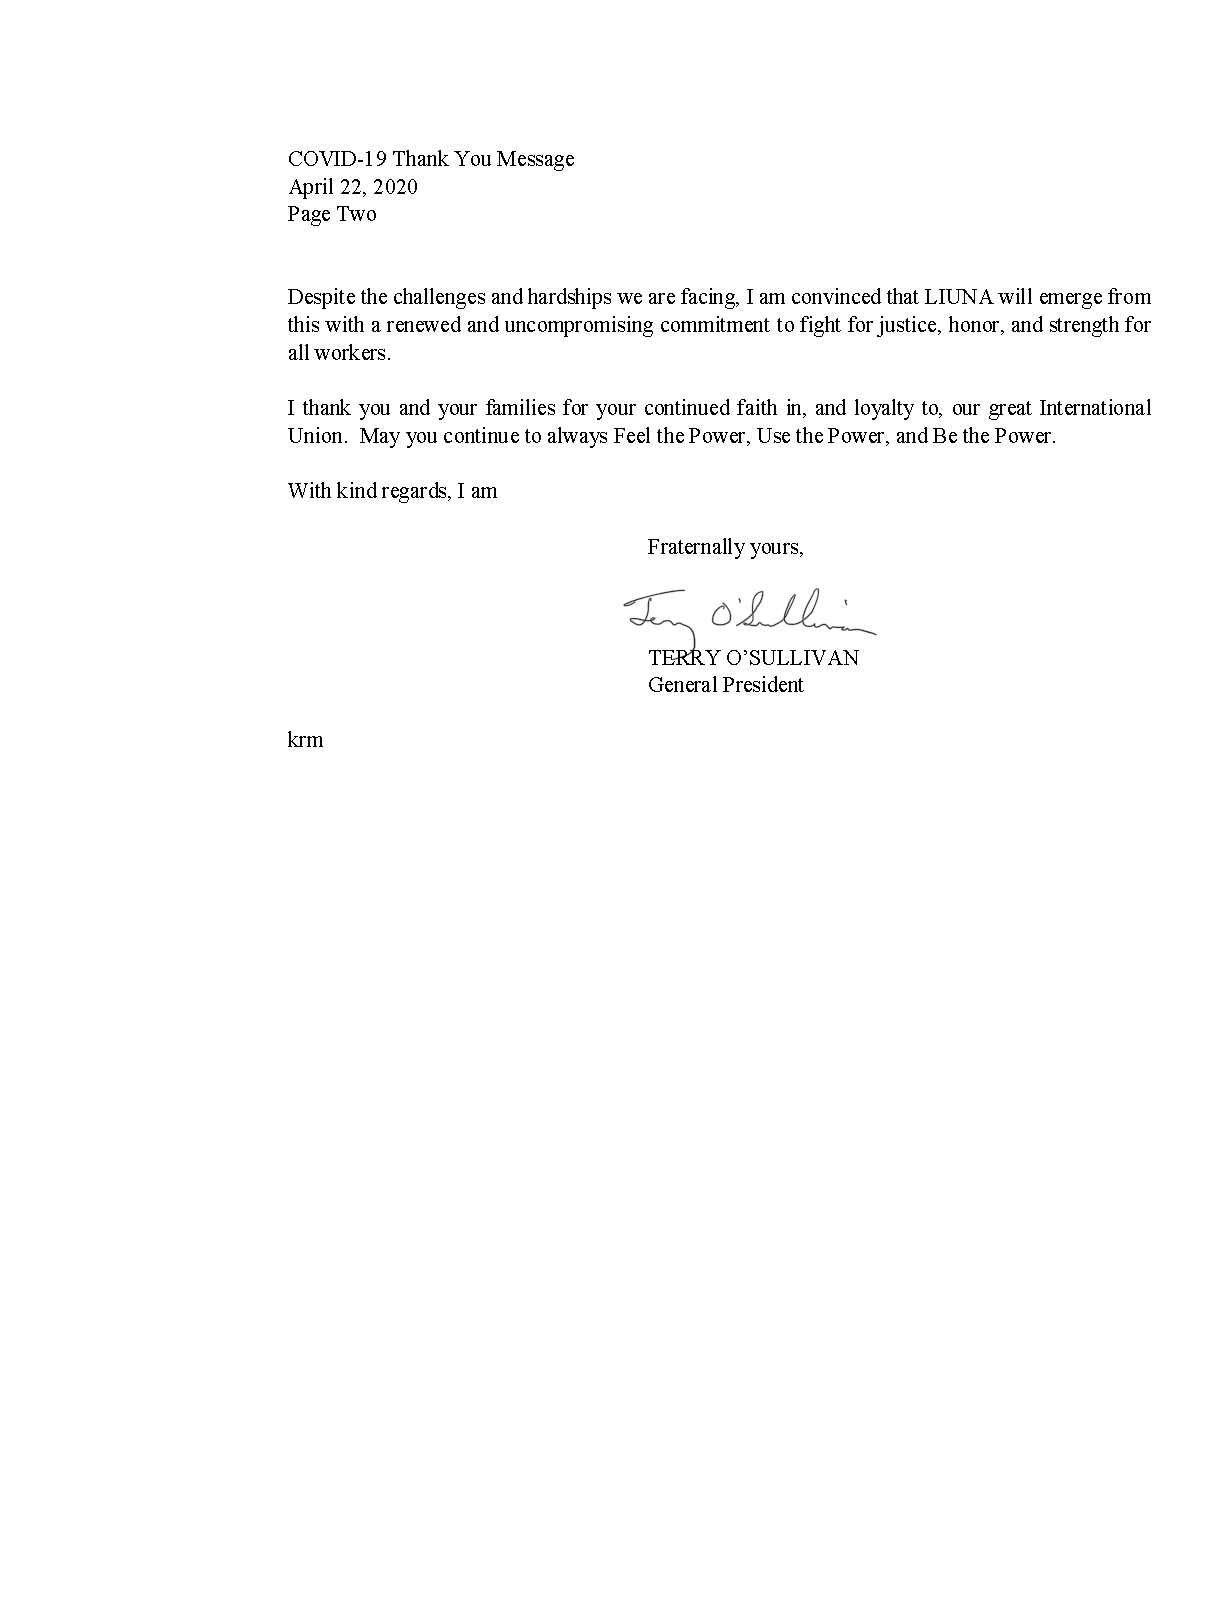 Thank You Letter from LIUNA General President, Terry O'Sullivan ...